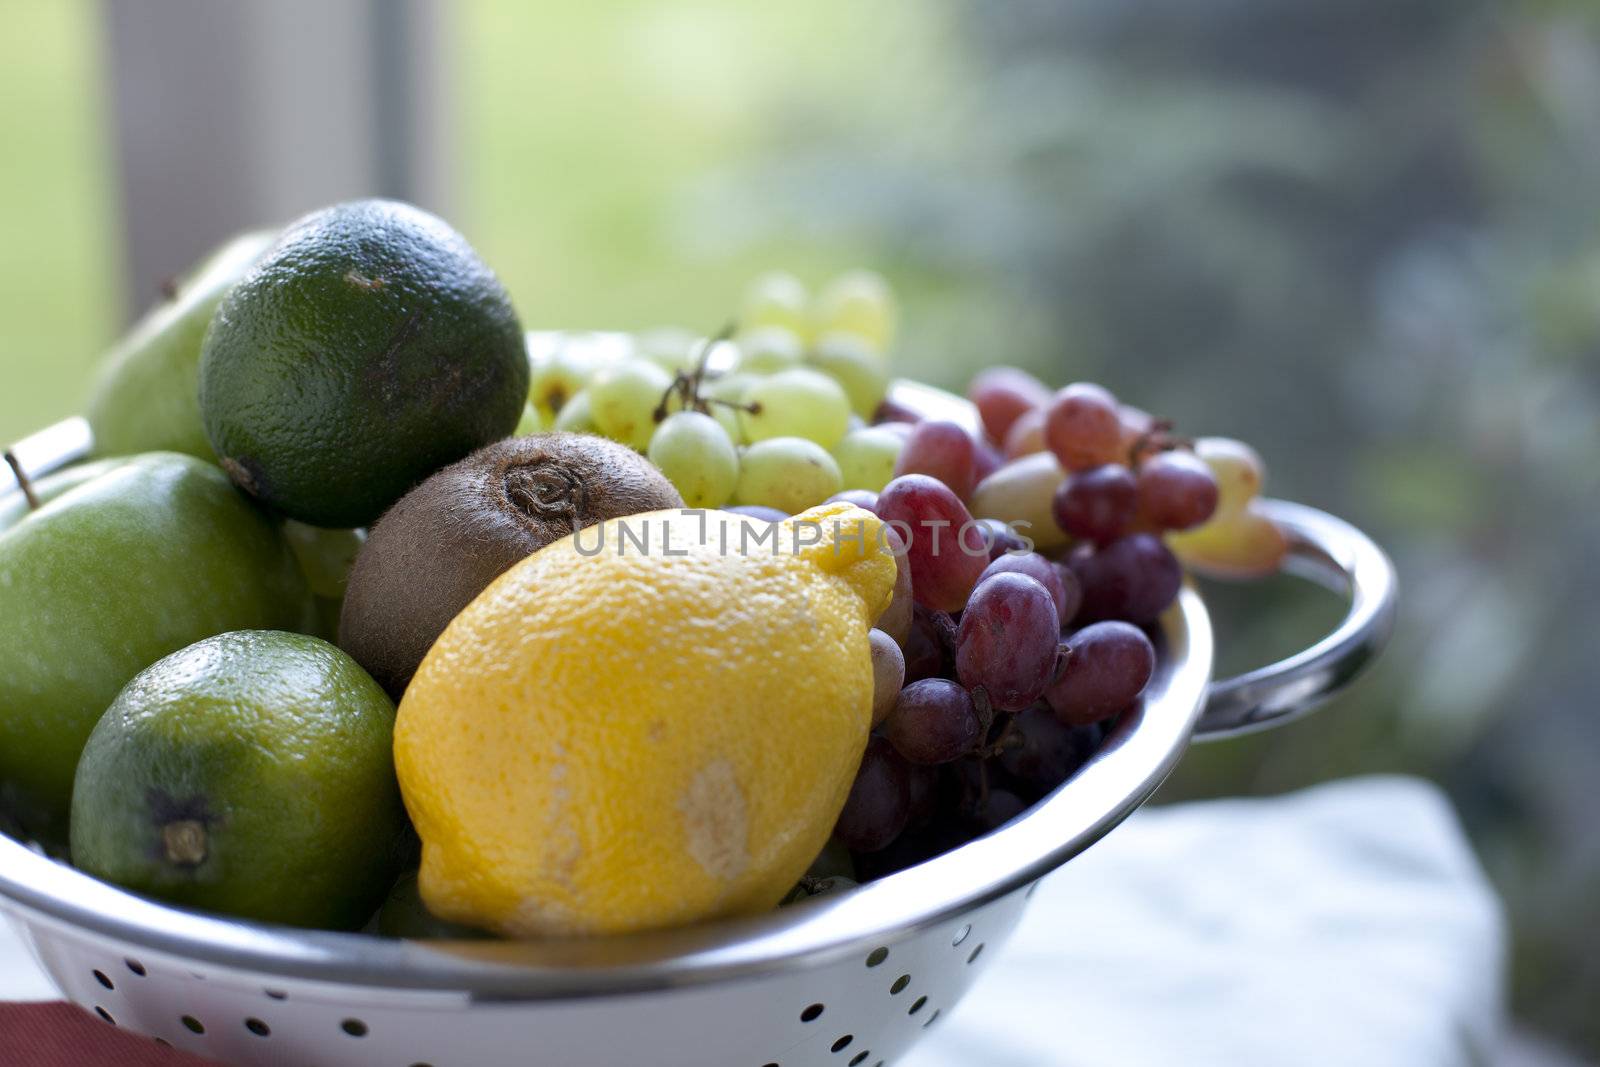 Colander of fresh fruit with shallow depth of field.